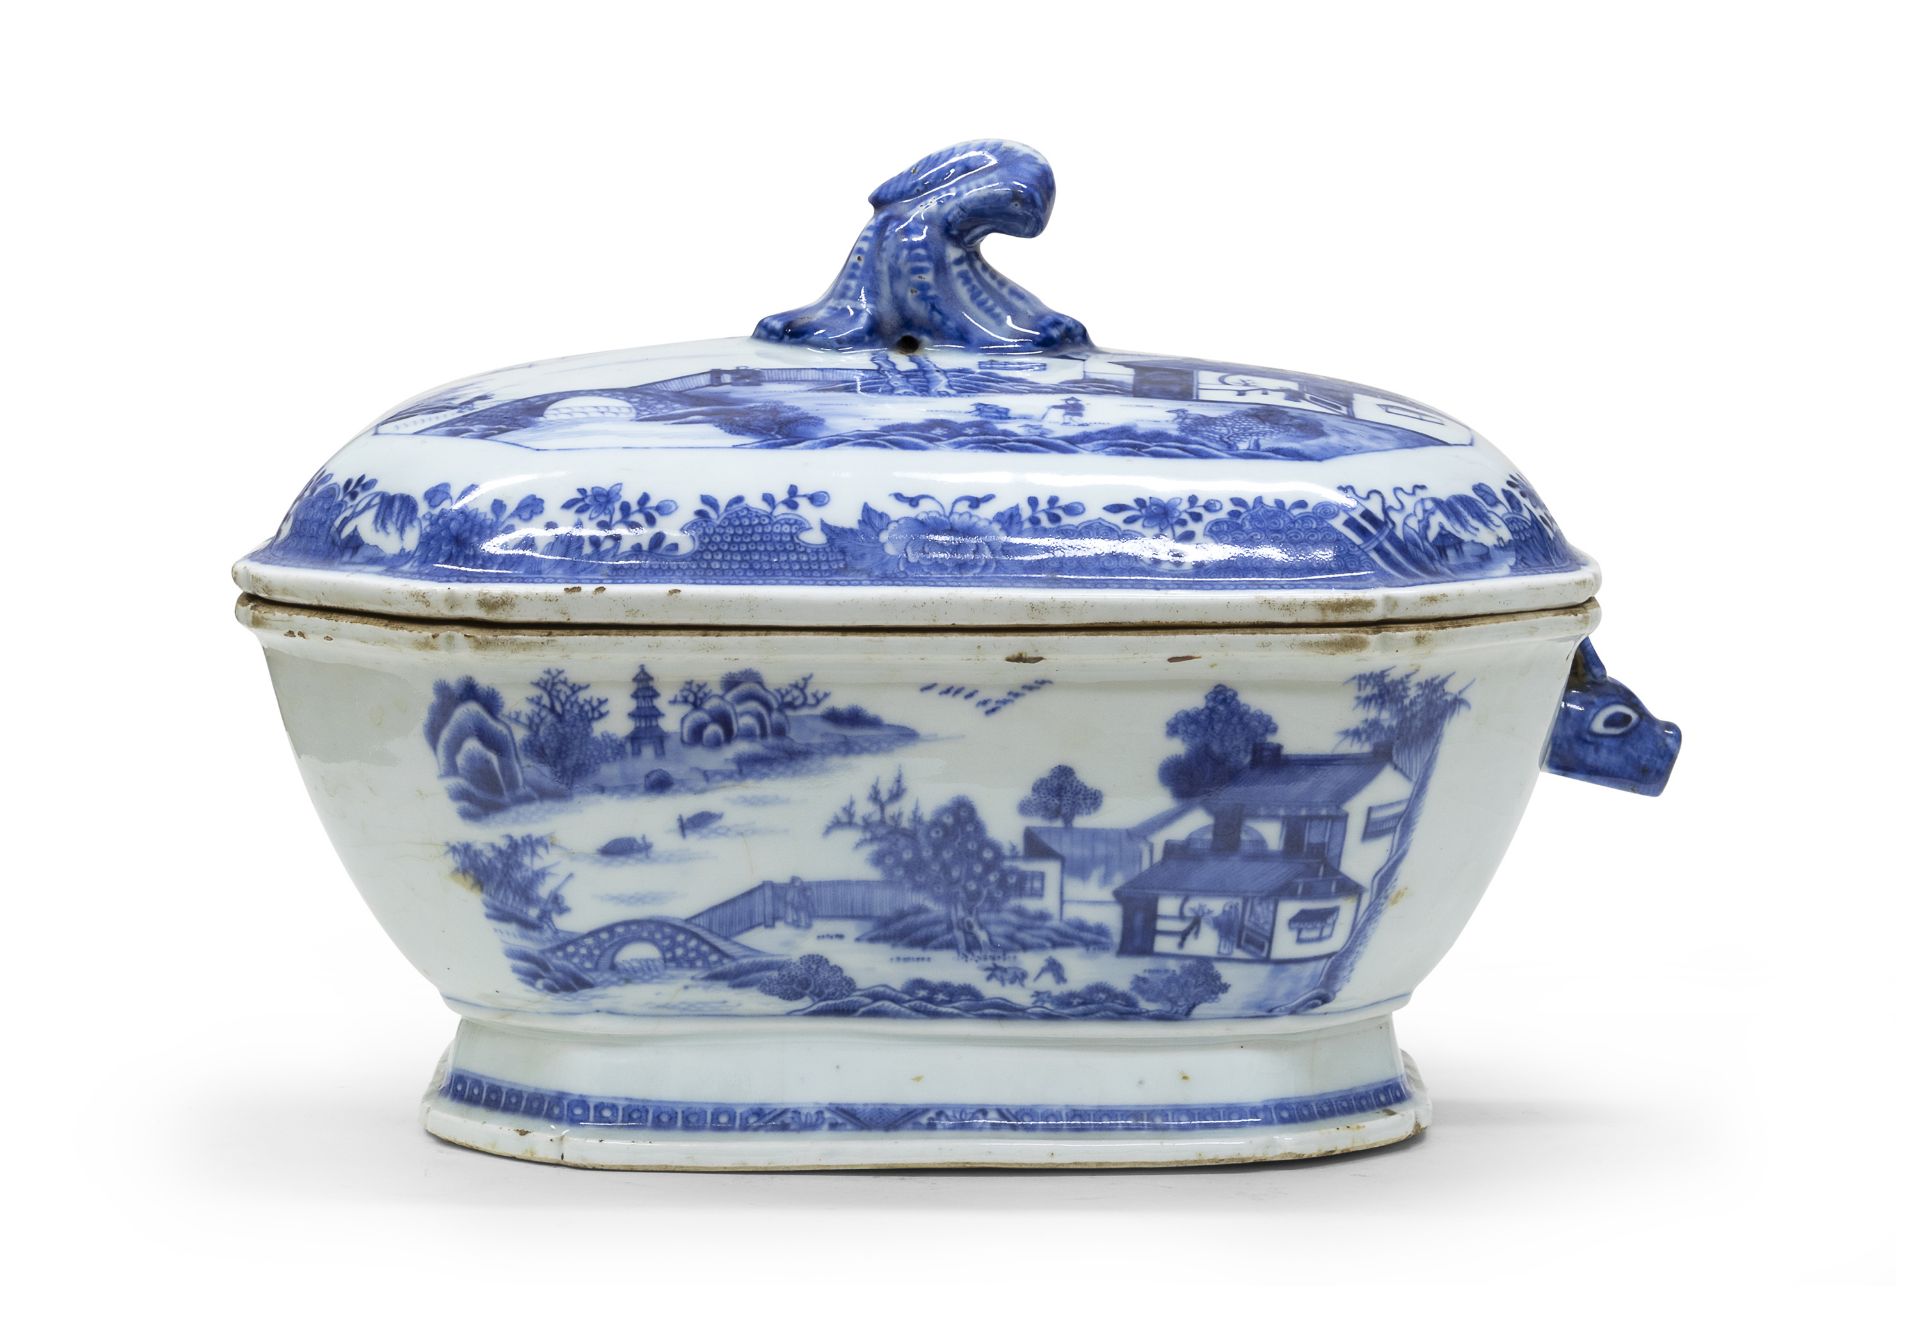 A CHINESE WHITE AND BLUE PORCELAIN TUREEN LATE 18TH CENTURY. ONE HANDLE MISSING.